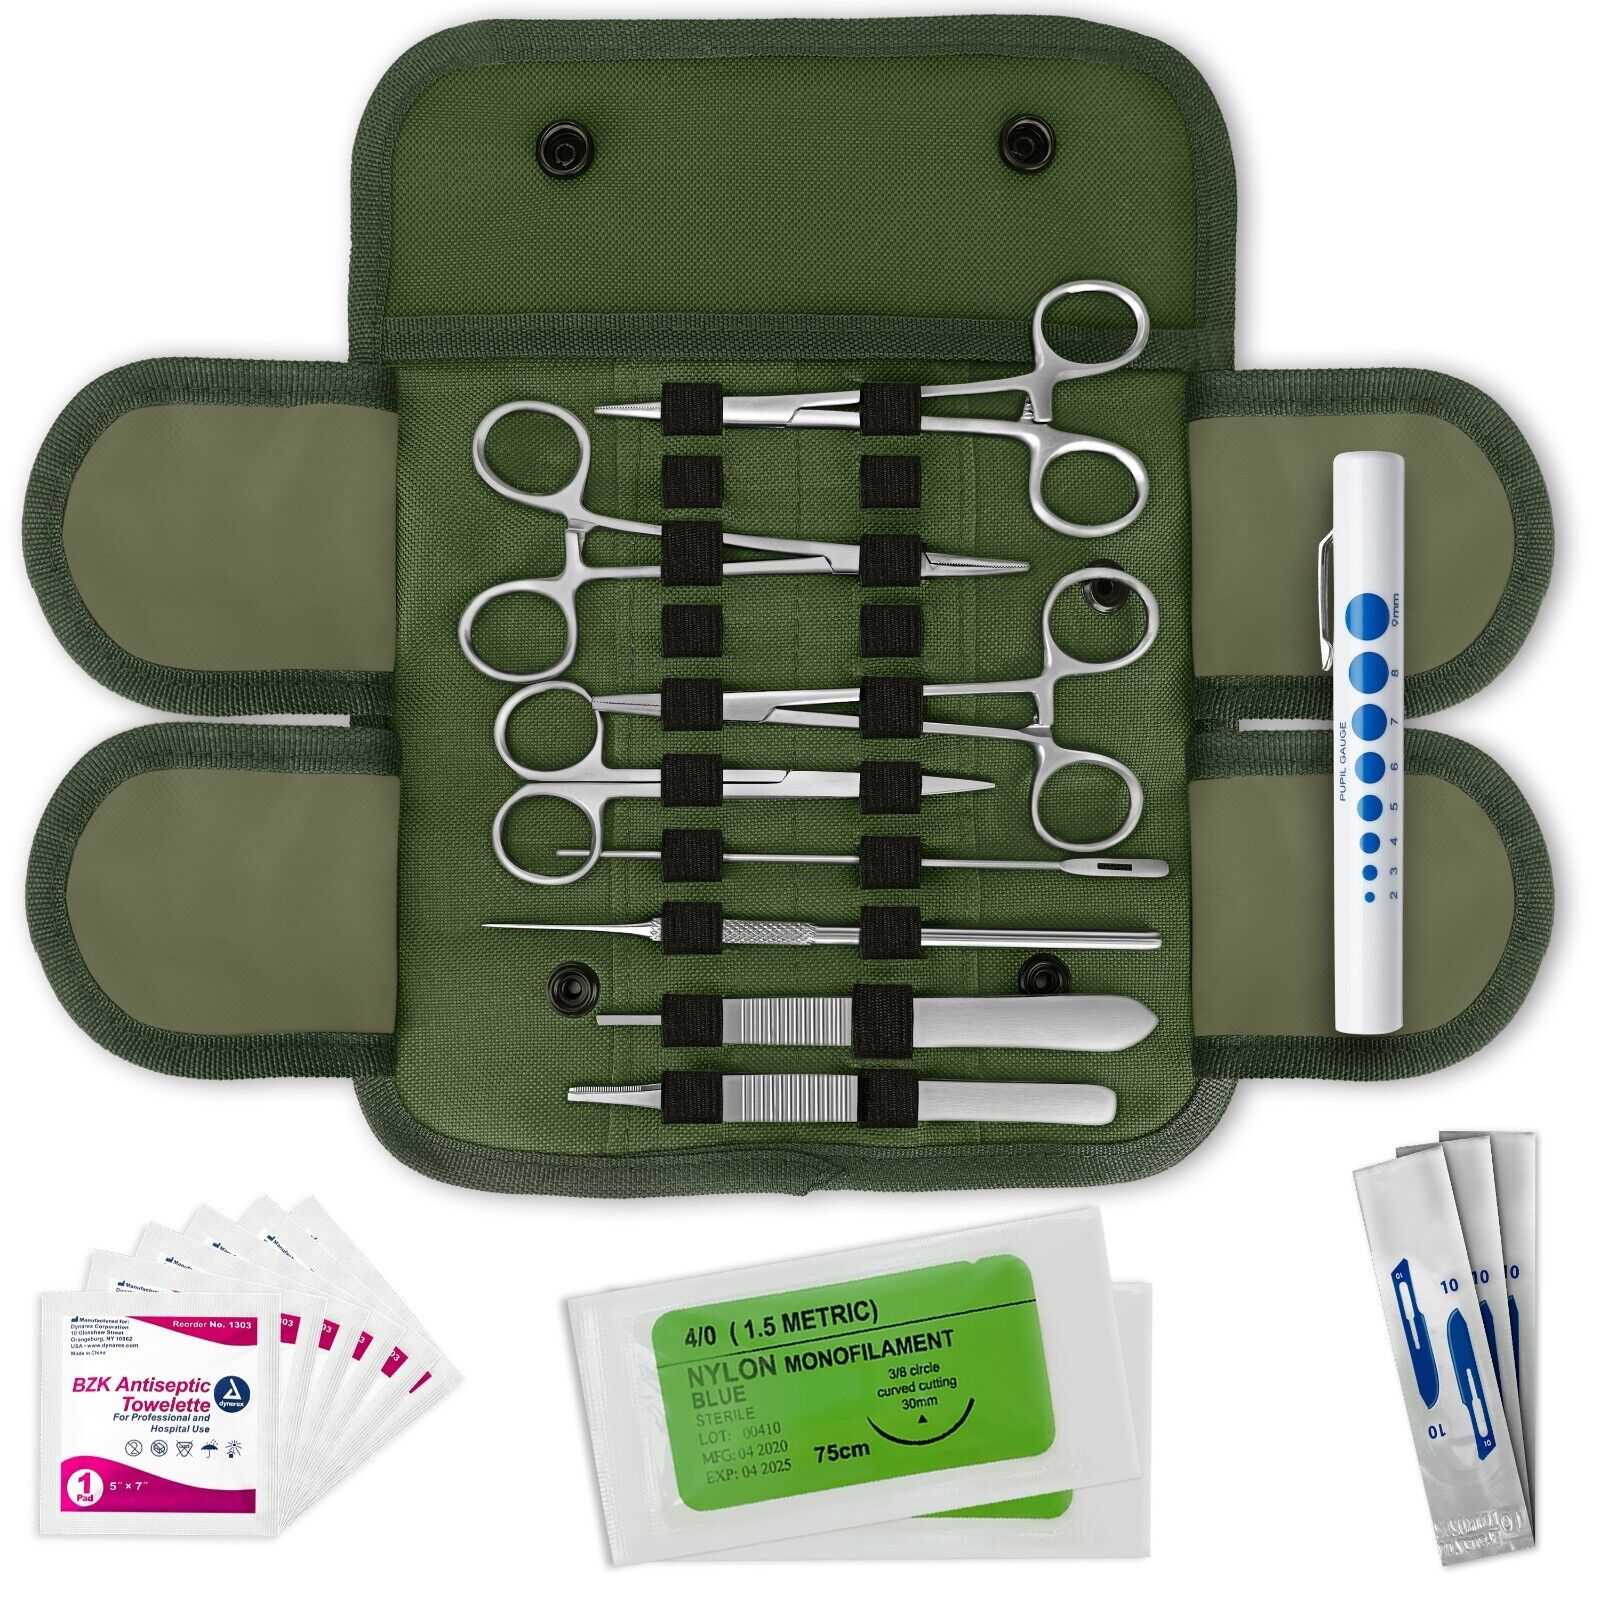 U.S. Military Style Emergency Survival Kit - Stop The Bleed Kit 20 PC ASATechmed